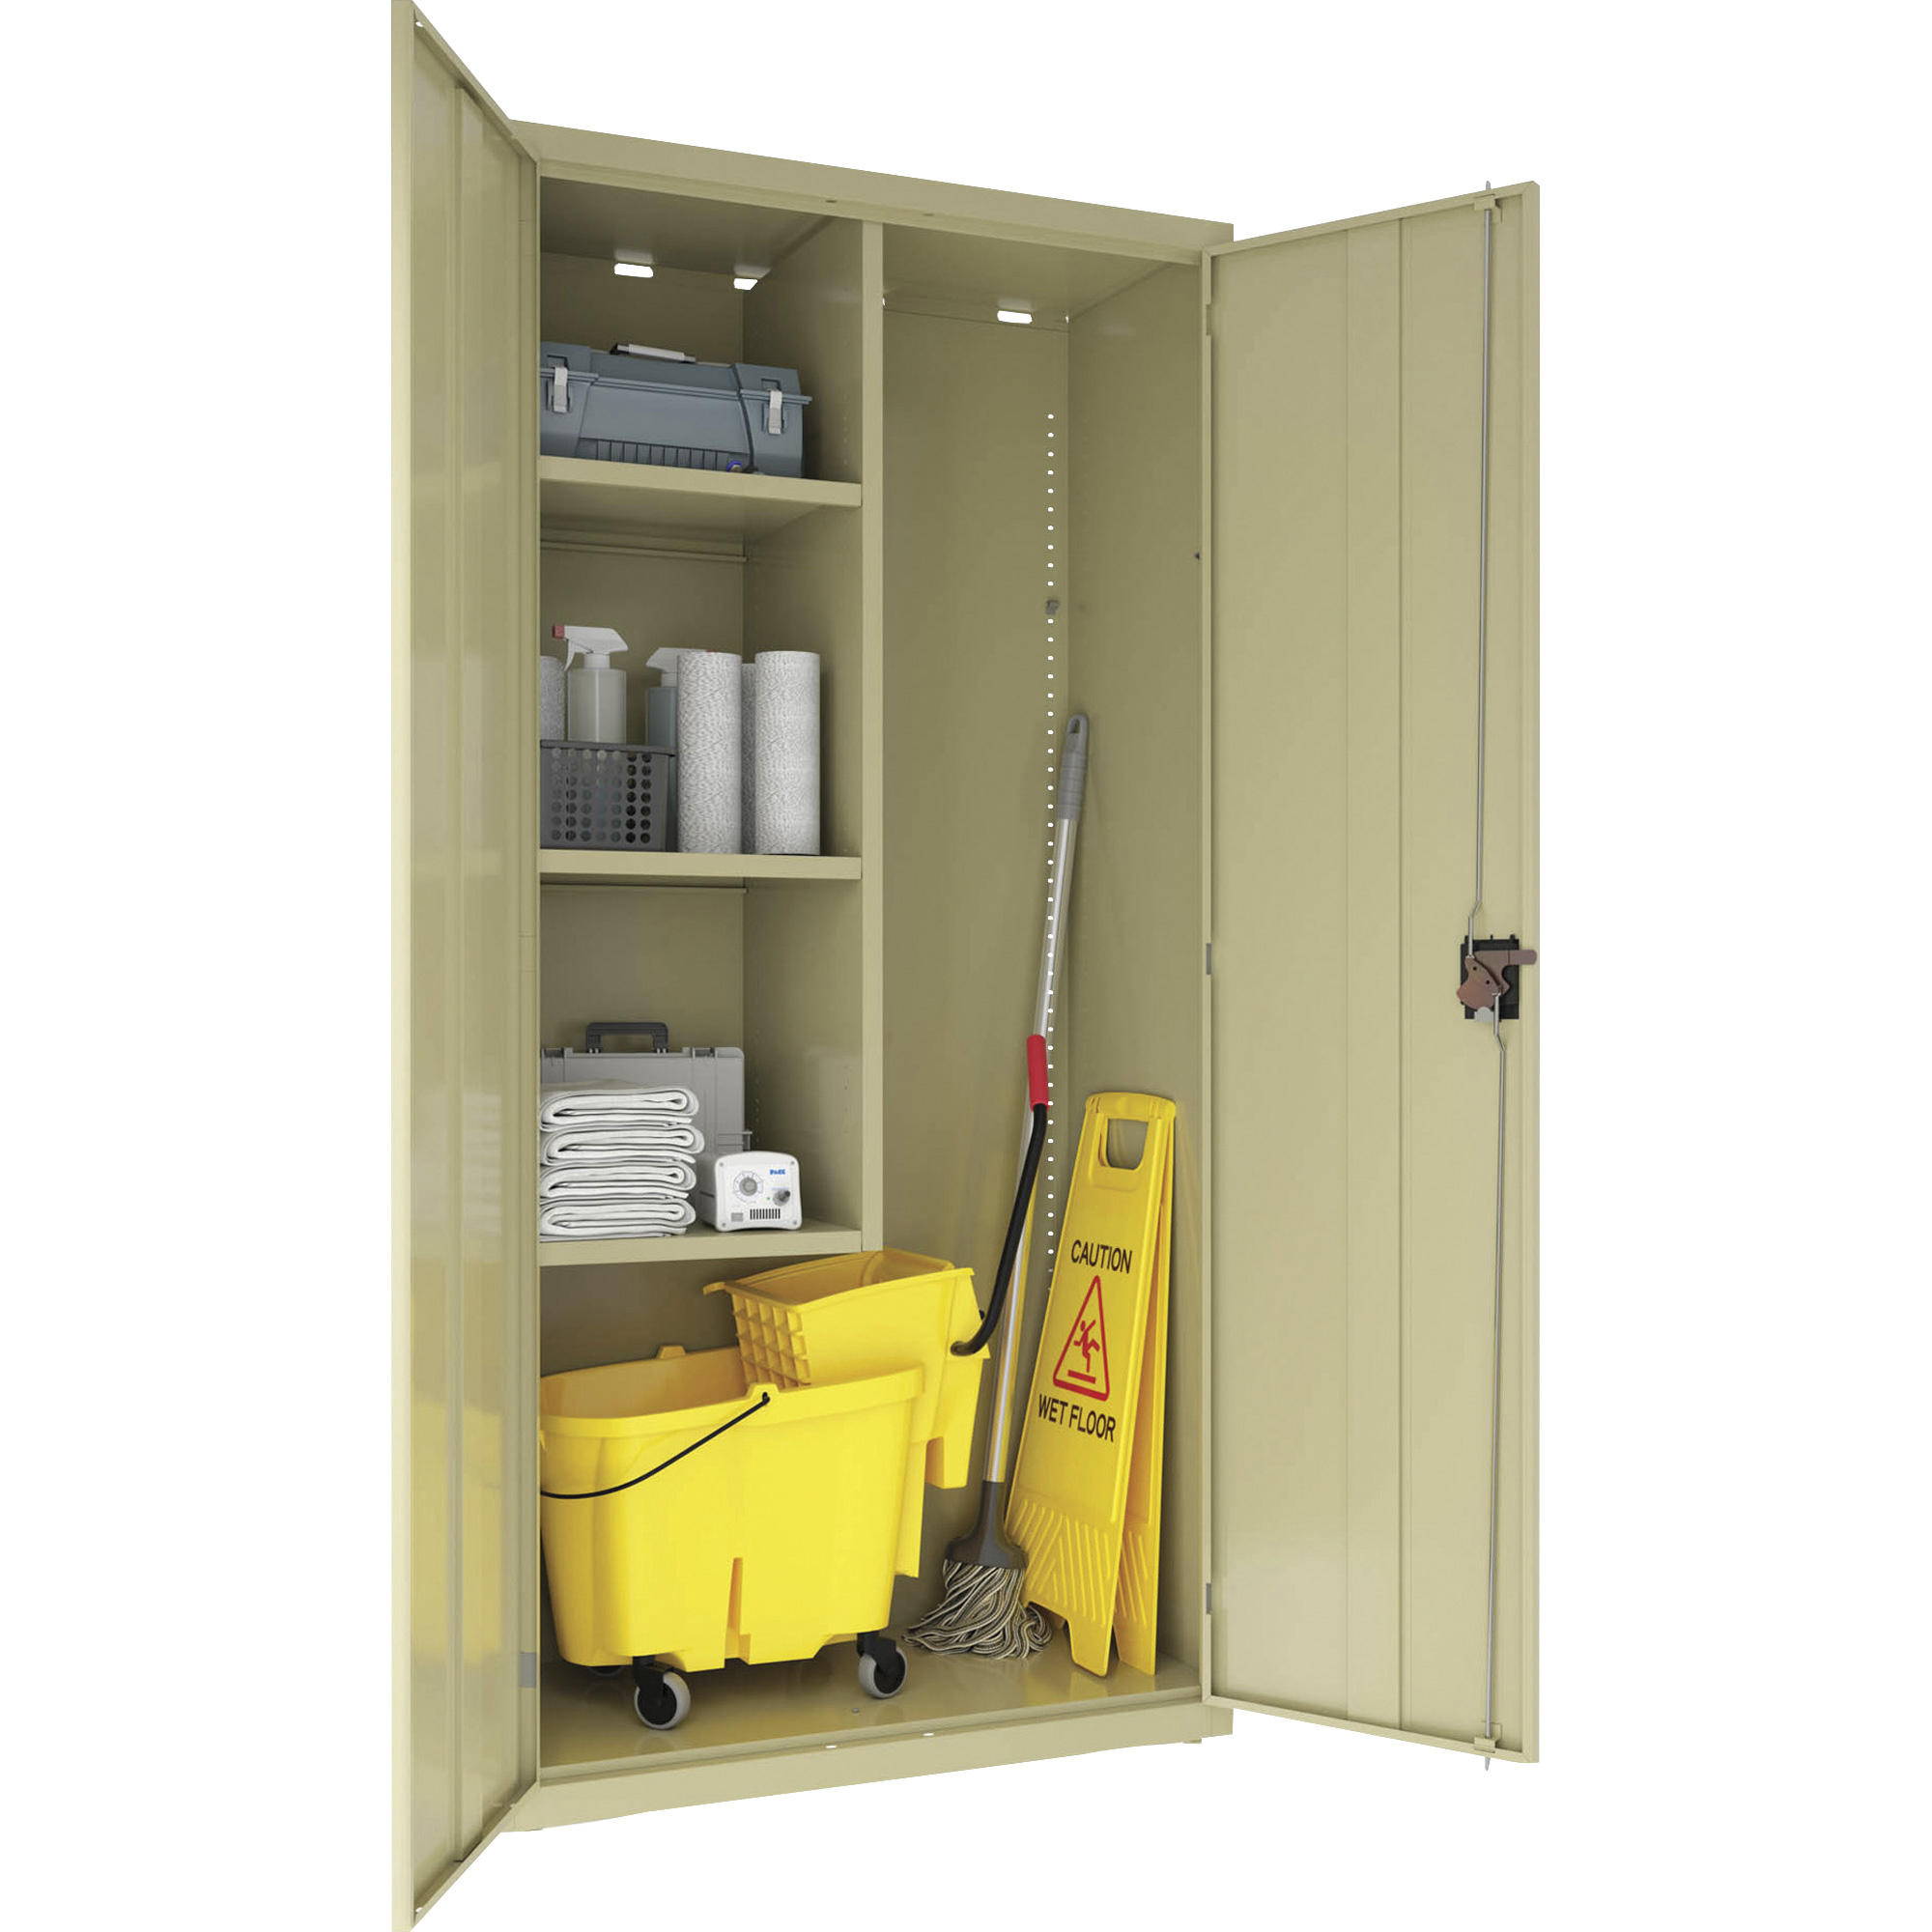 1162 Half Width Shelf for All-Welded Combination Cabinets